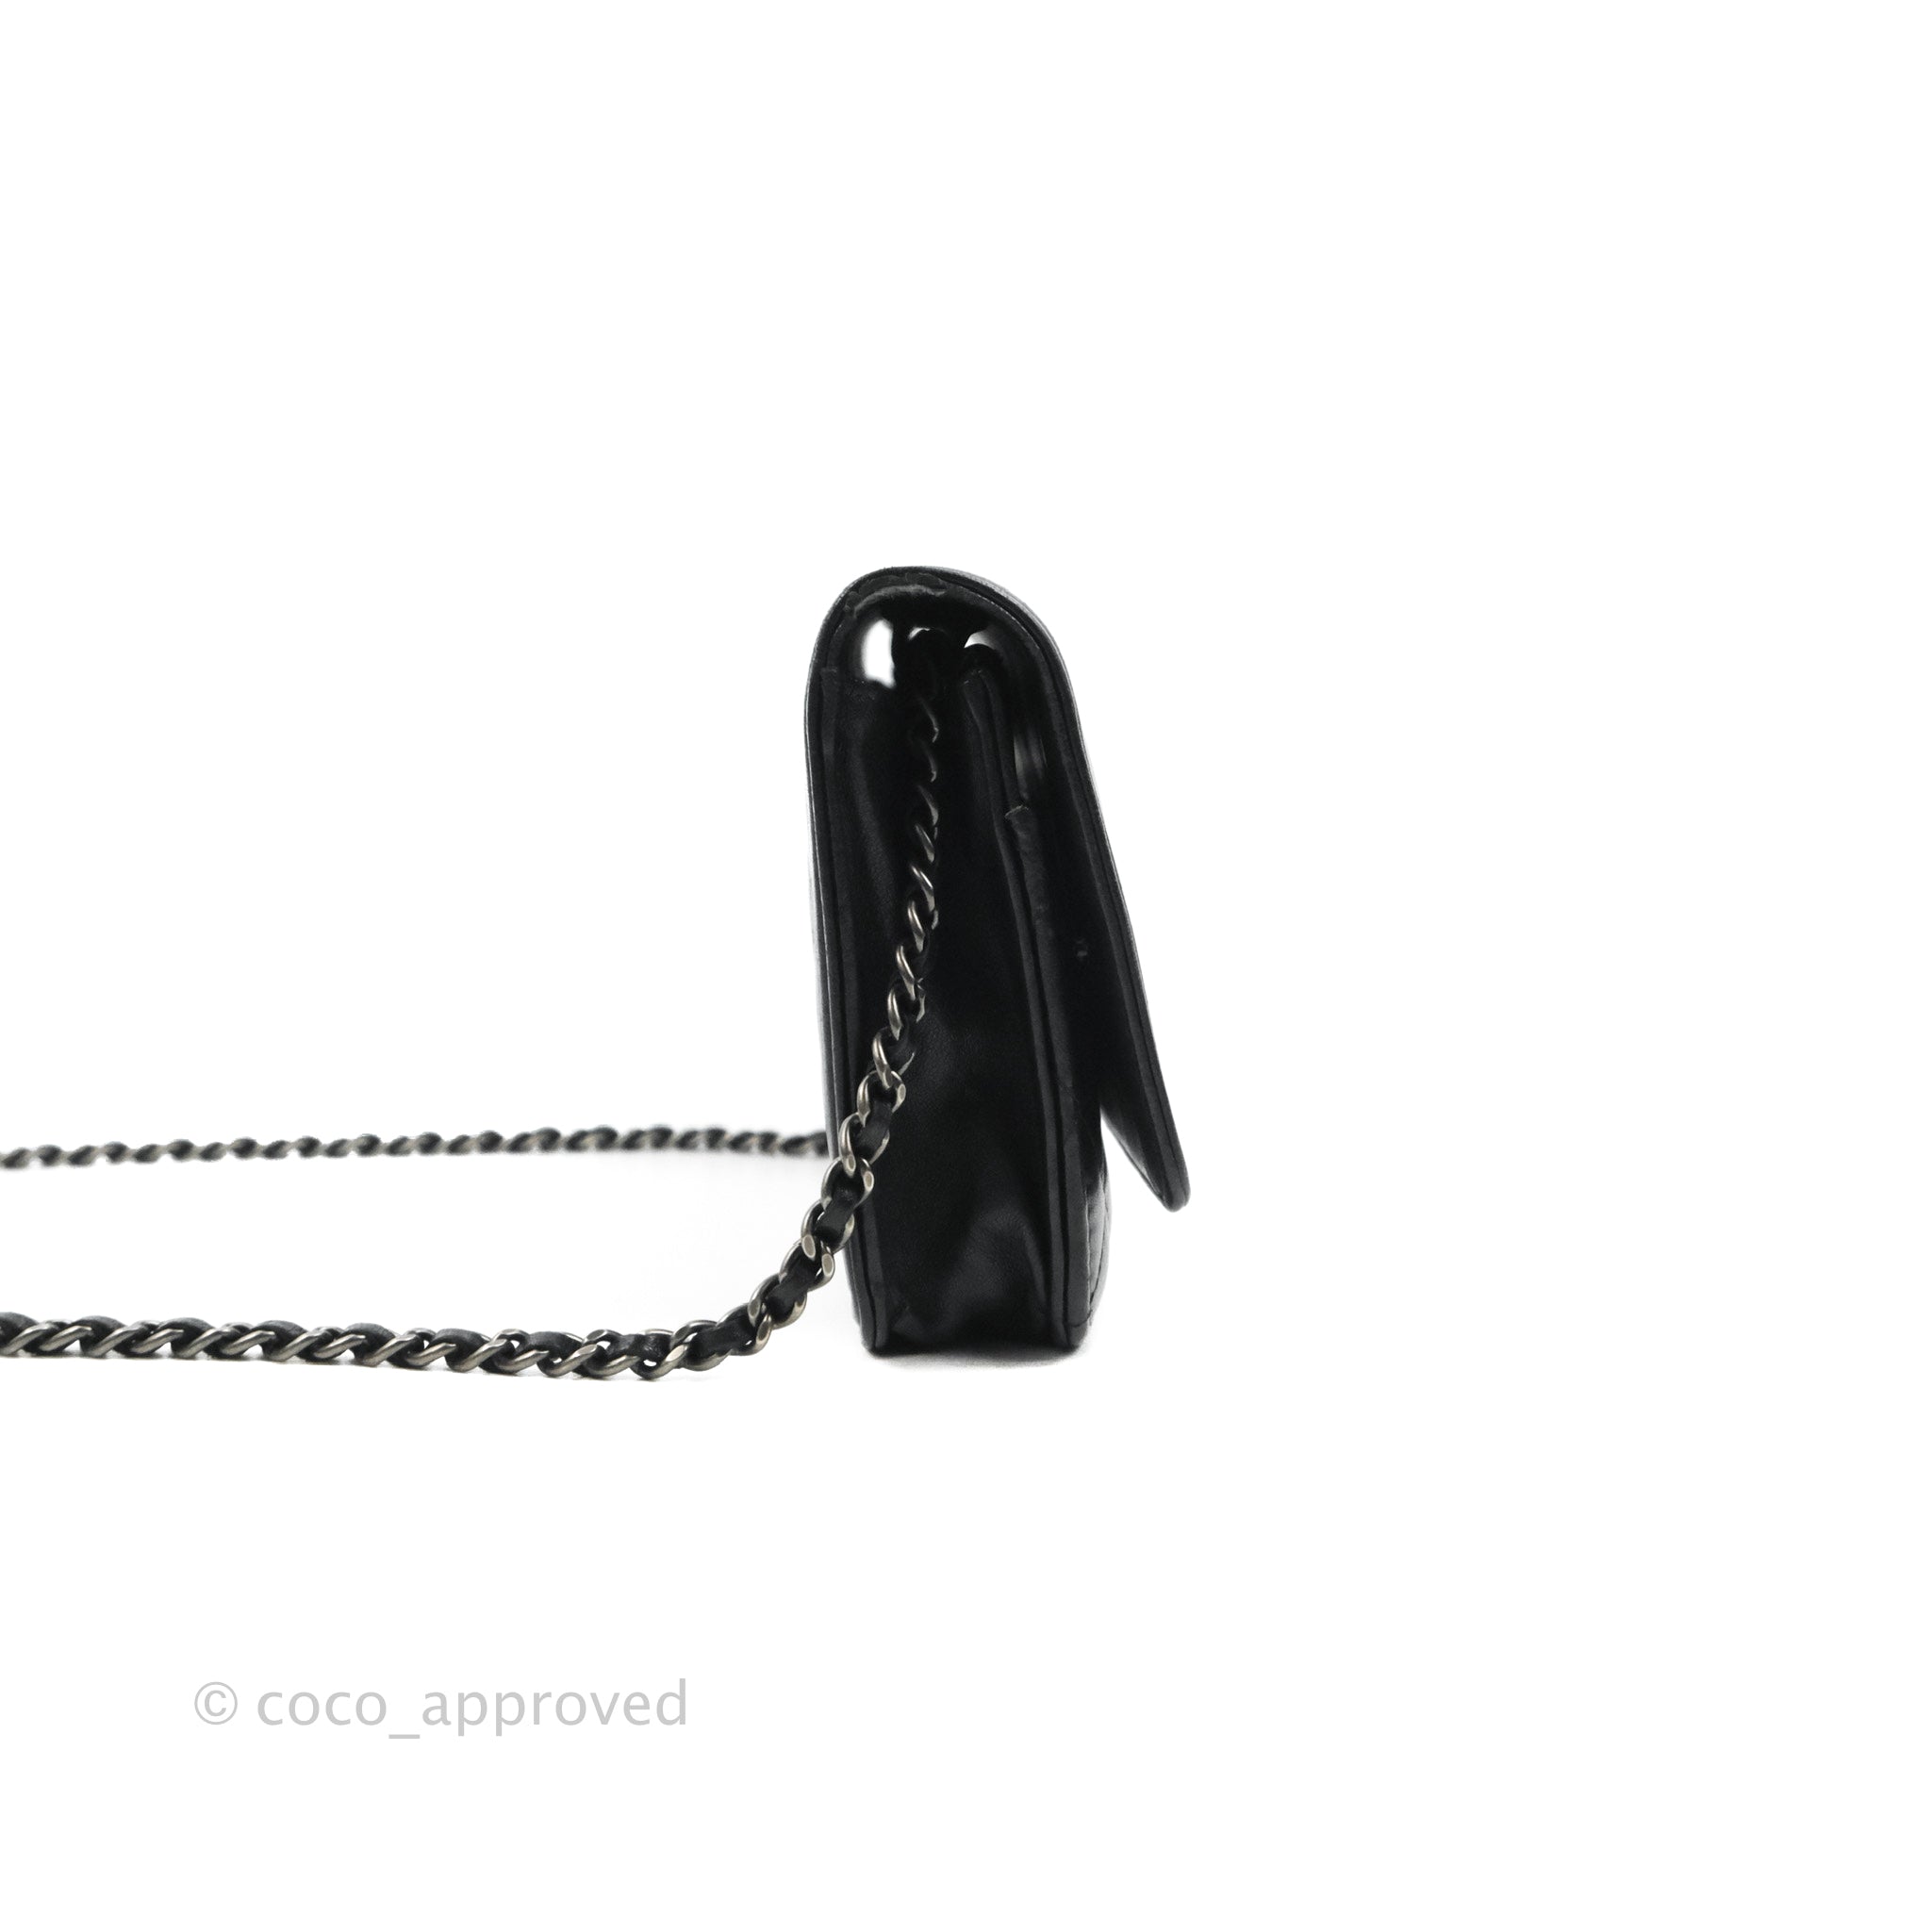 THE MENUE - CHANEL WALLET ON CHAIN